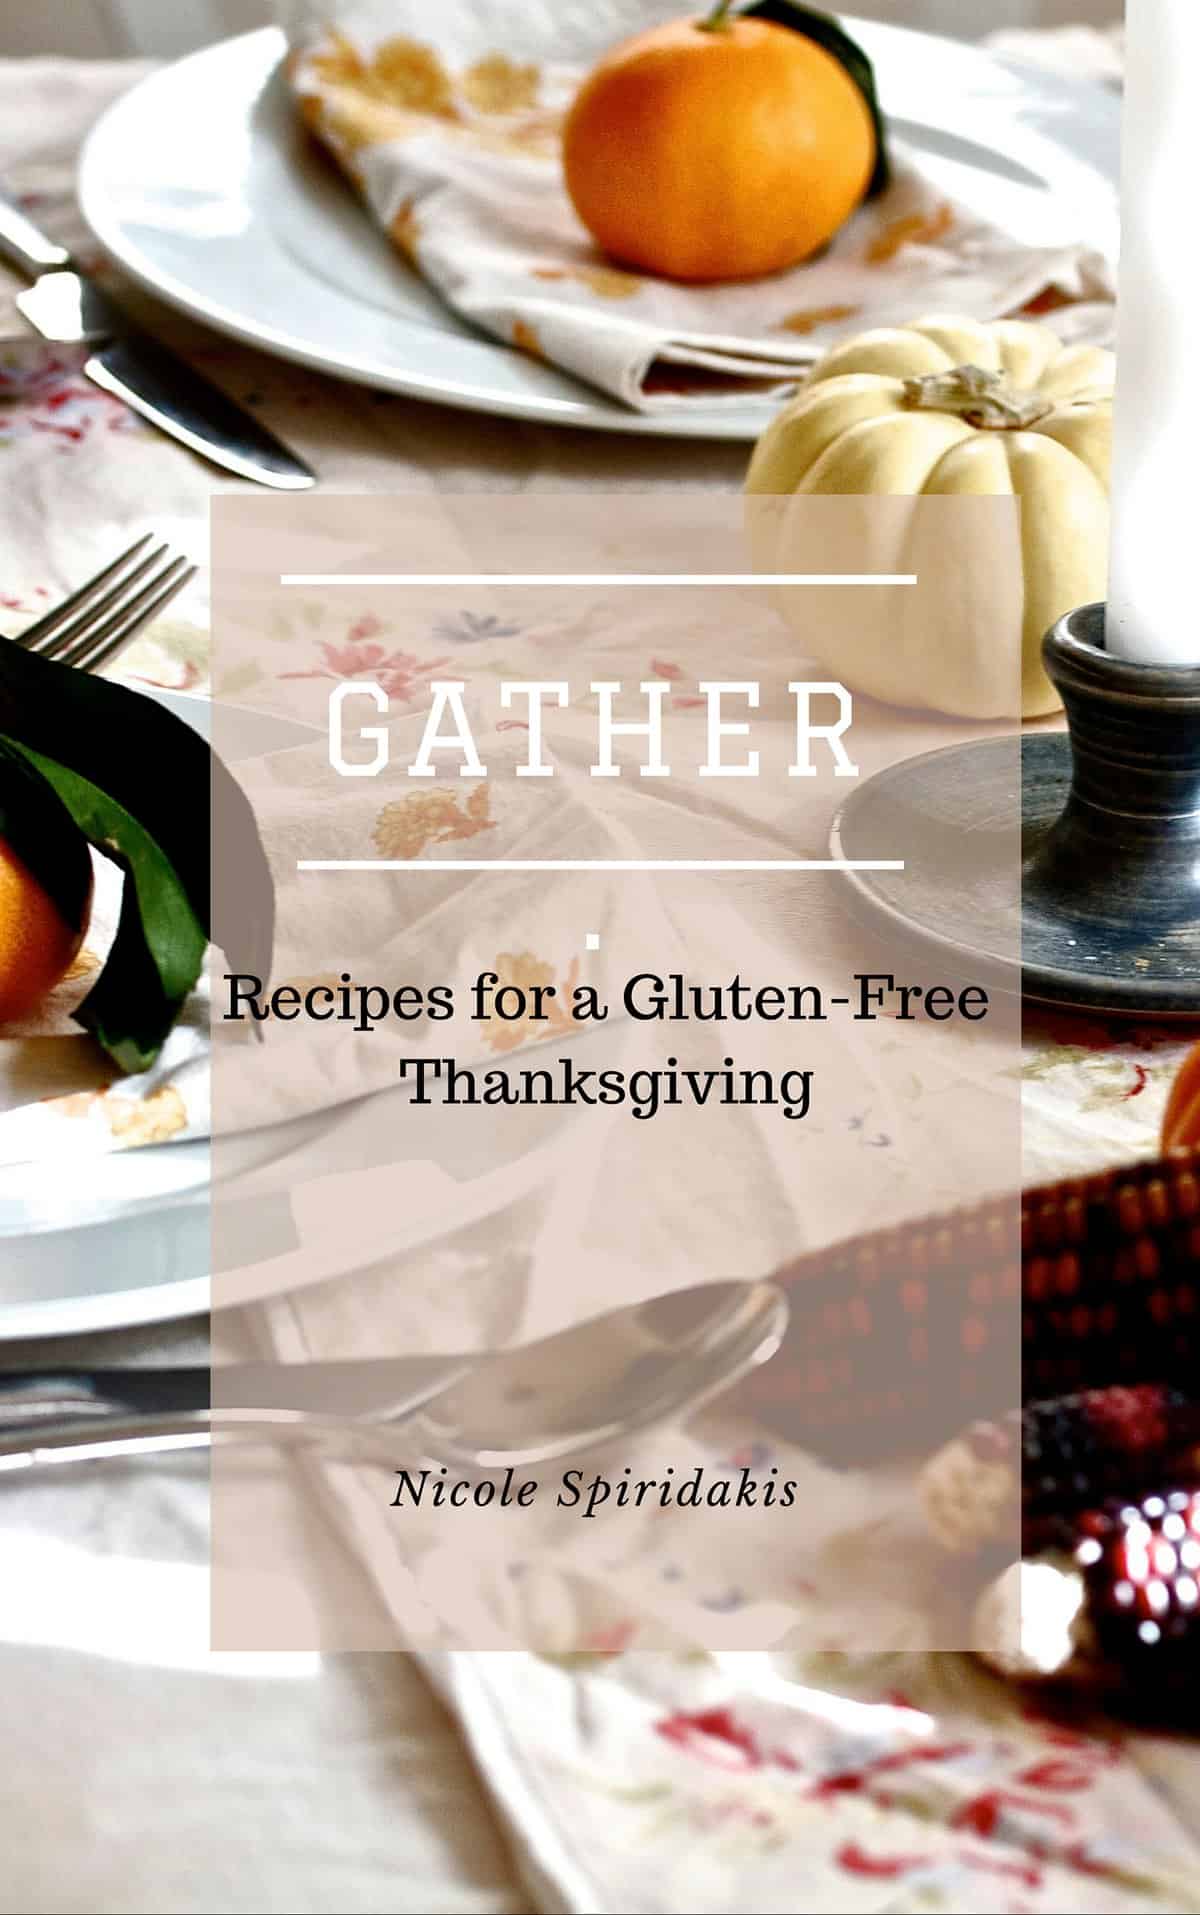 Gather: Recipes for A Gluten-Free Thanksgiving